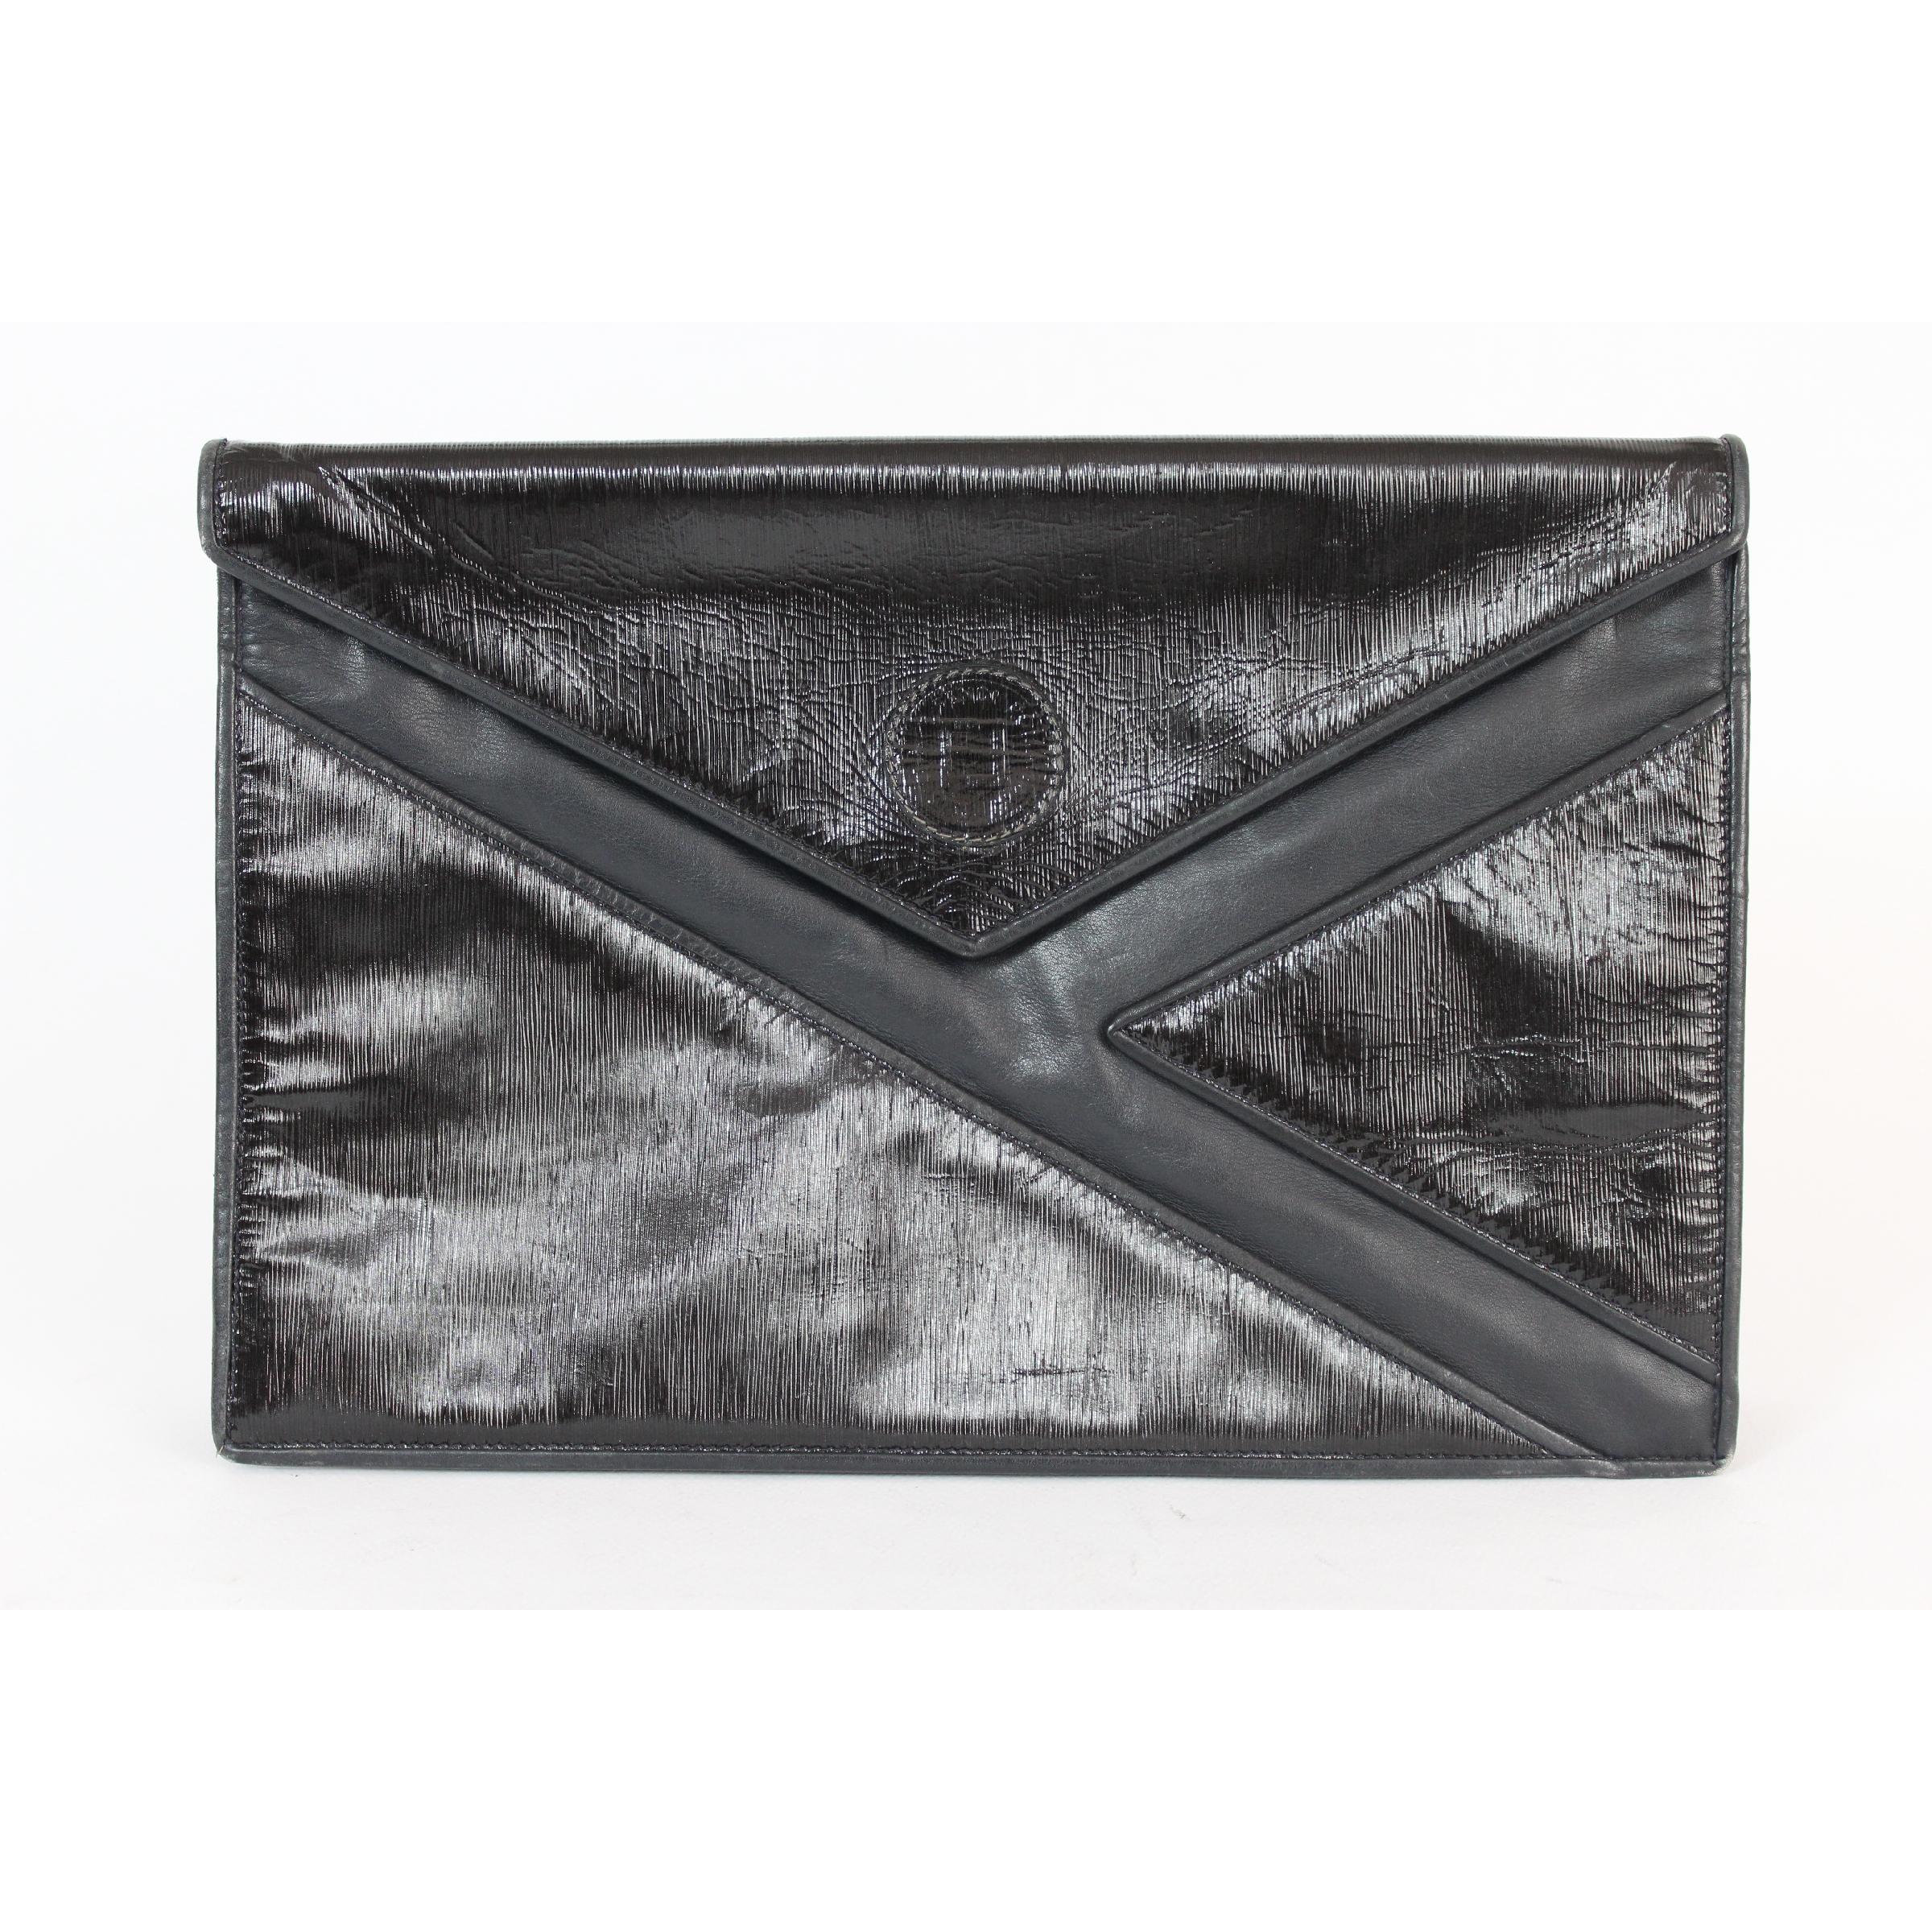 Fendi Dark Blue Patent Leather Clutch Bag 1970s In Excellent Condition In Brindisi, Bt